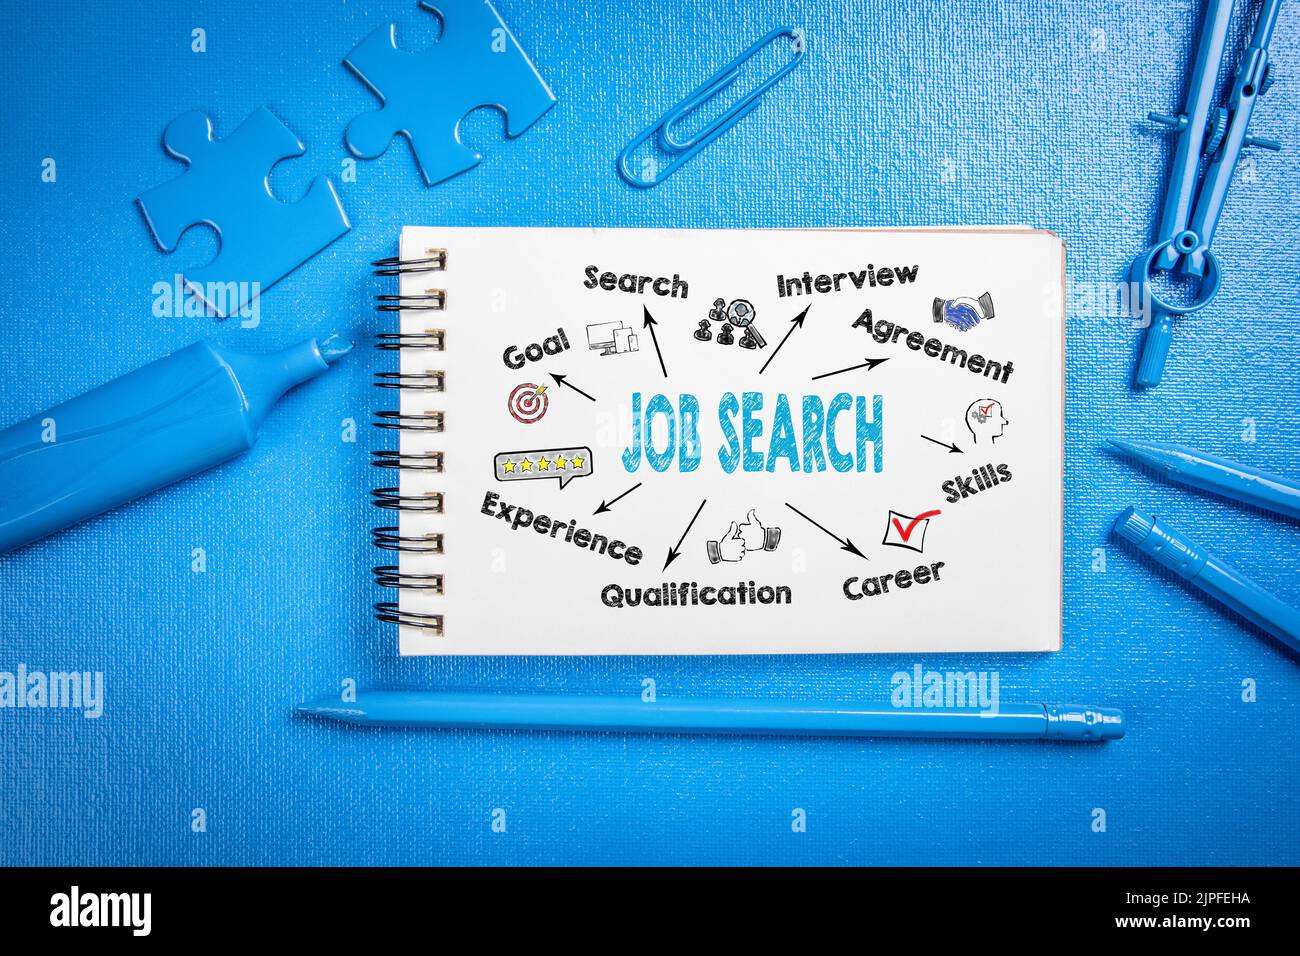 Job Search Concept. Chart with keywords and icons. Abstract blue office desk. Stock Photo